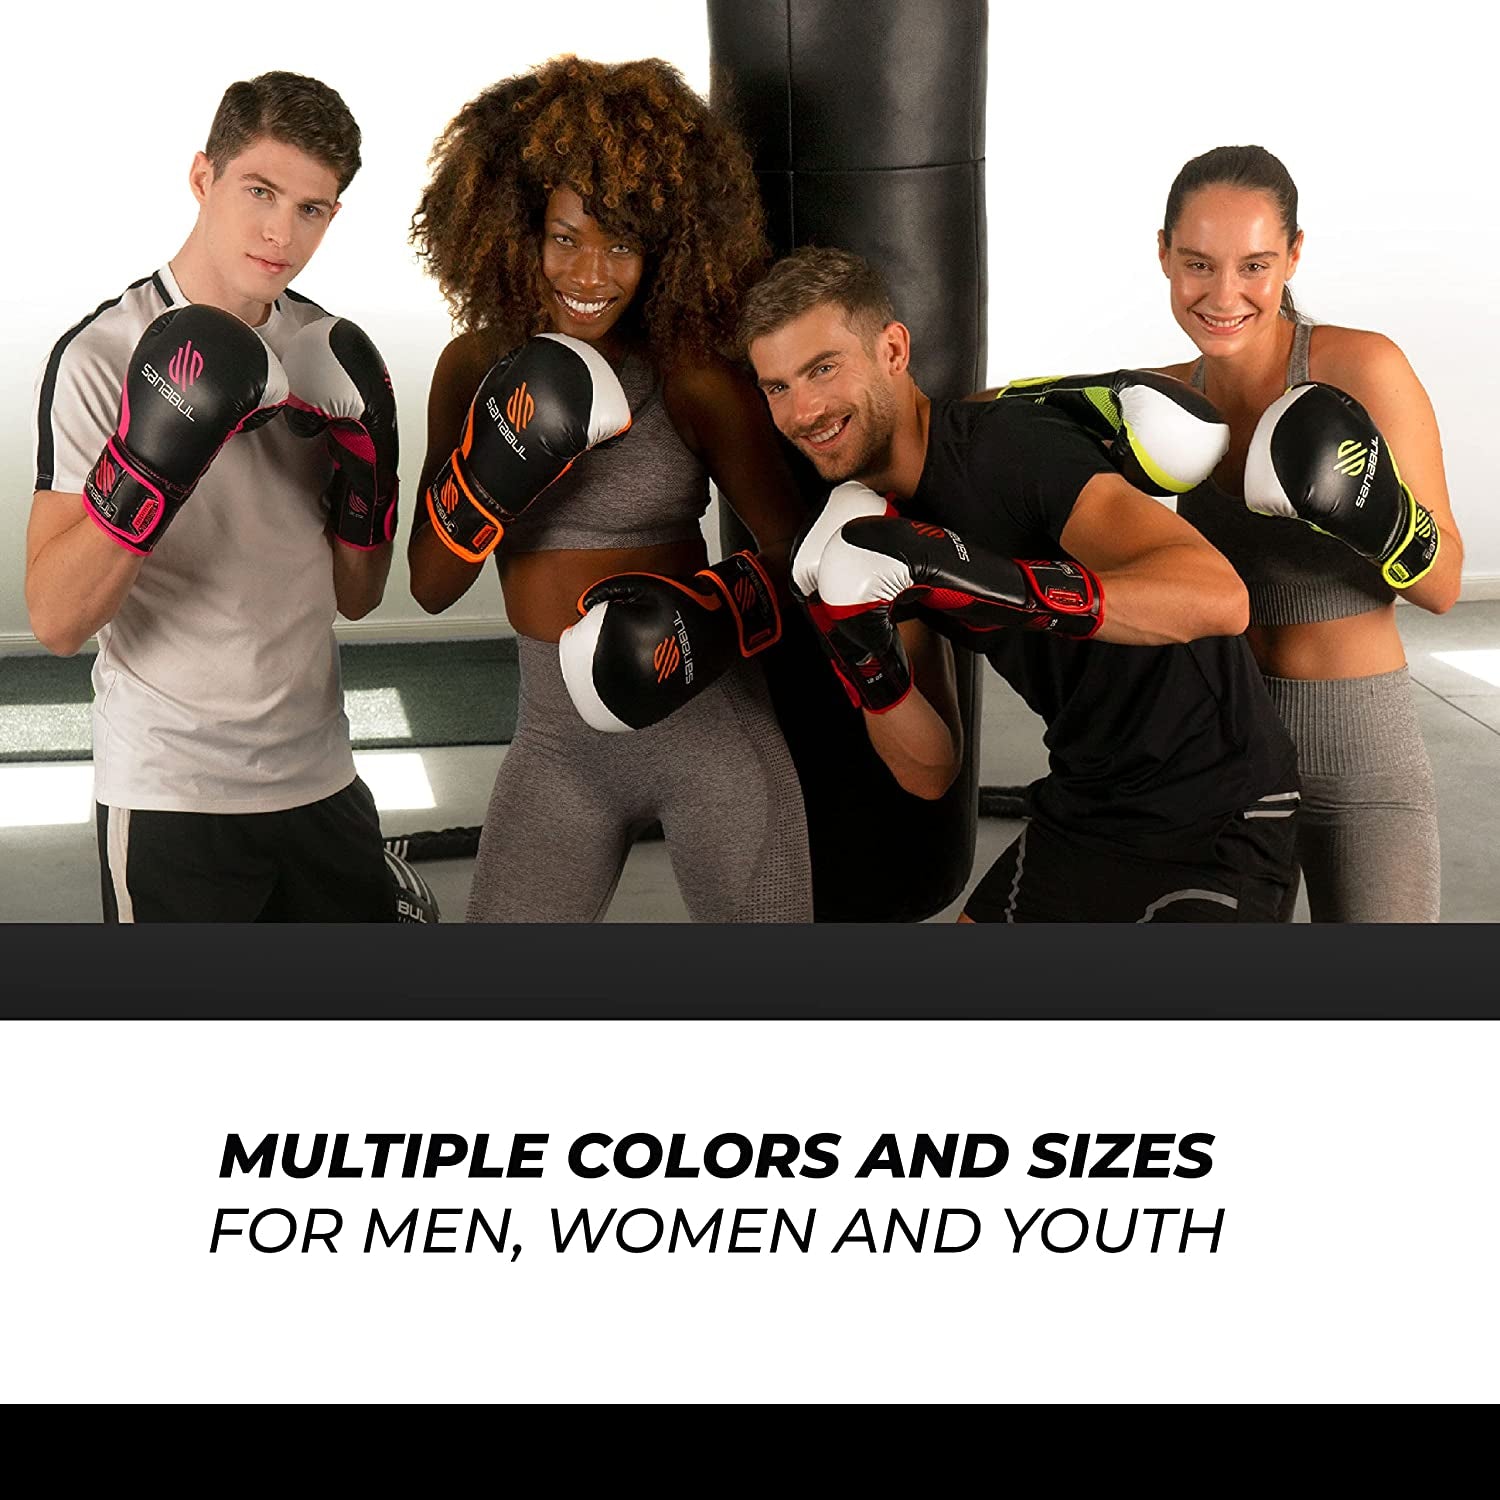 Essential Gel Boxing Gloves | Pro-Tested Kickboxing Gloves for Men and Women | Ideal for Boxing, MMA, Muay Thai, and Heavy Bag Training